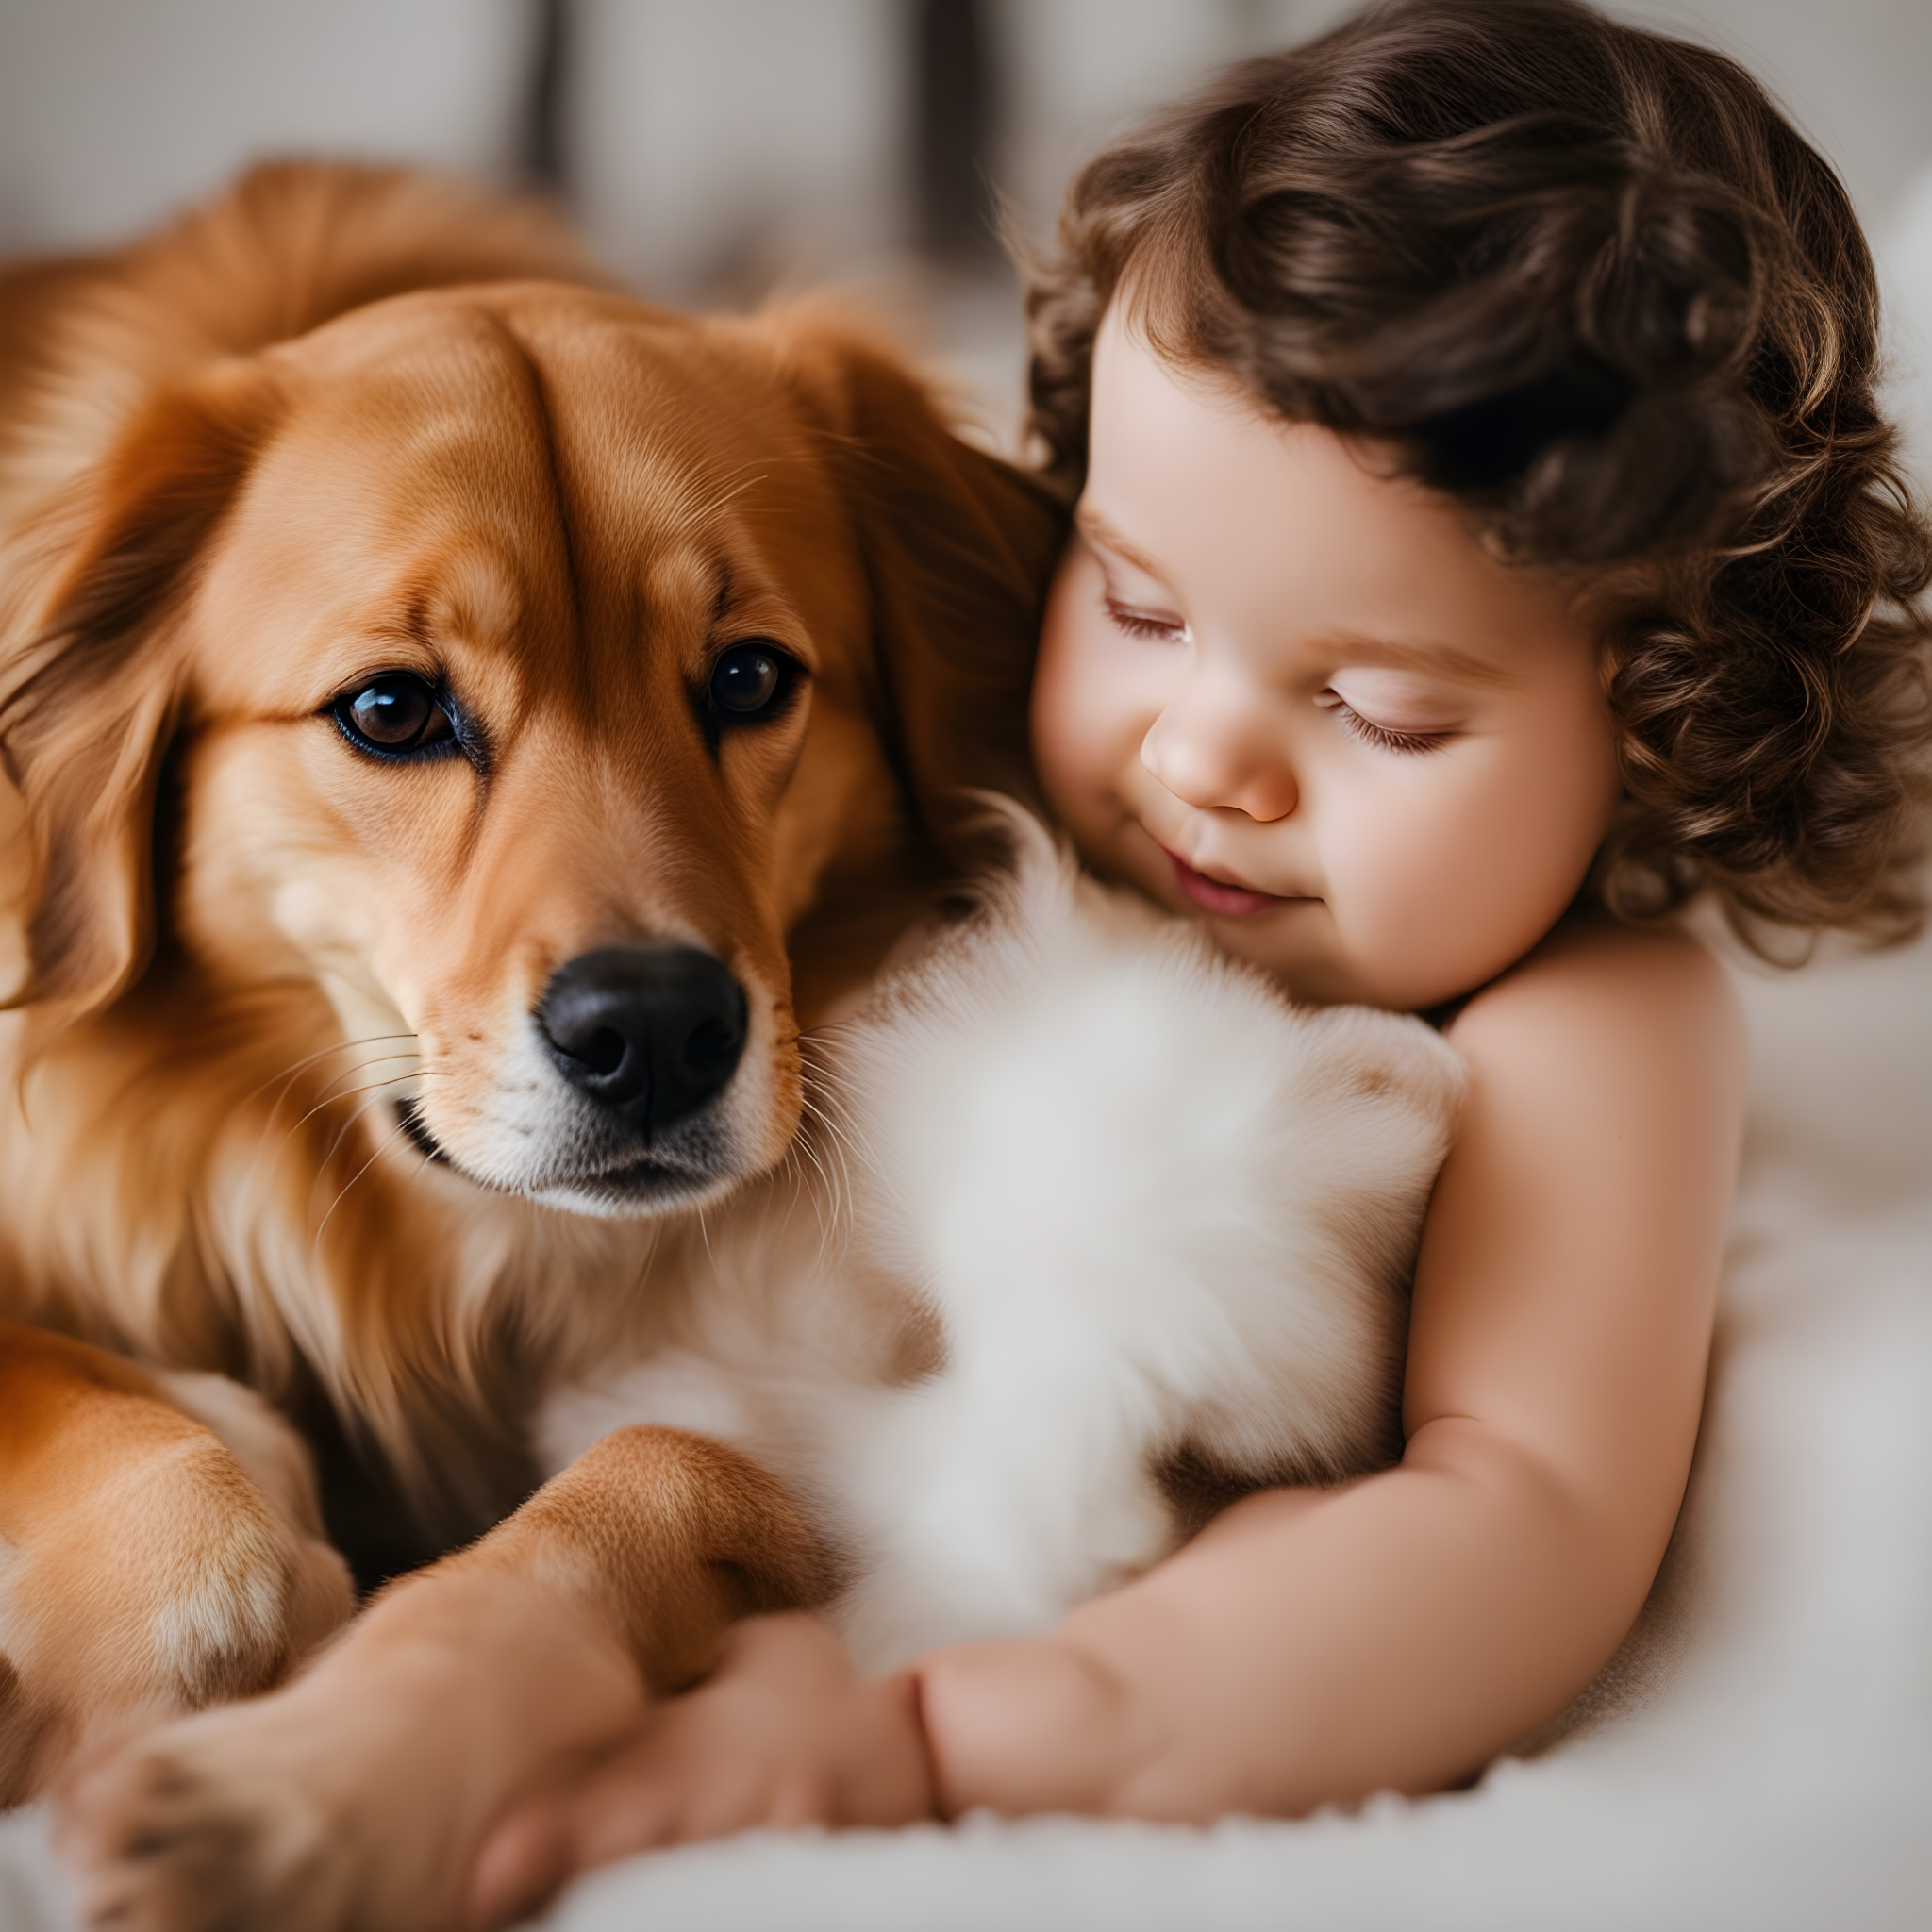 Can Pets and Babies Coexist?